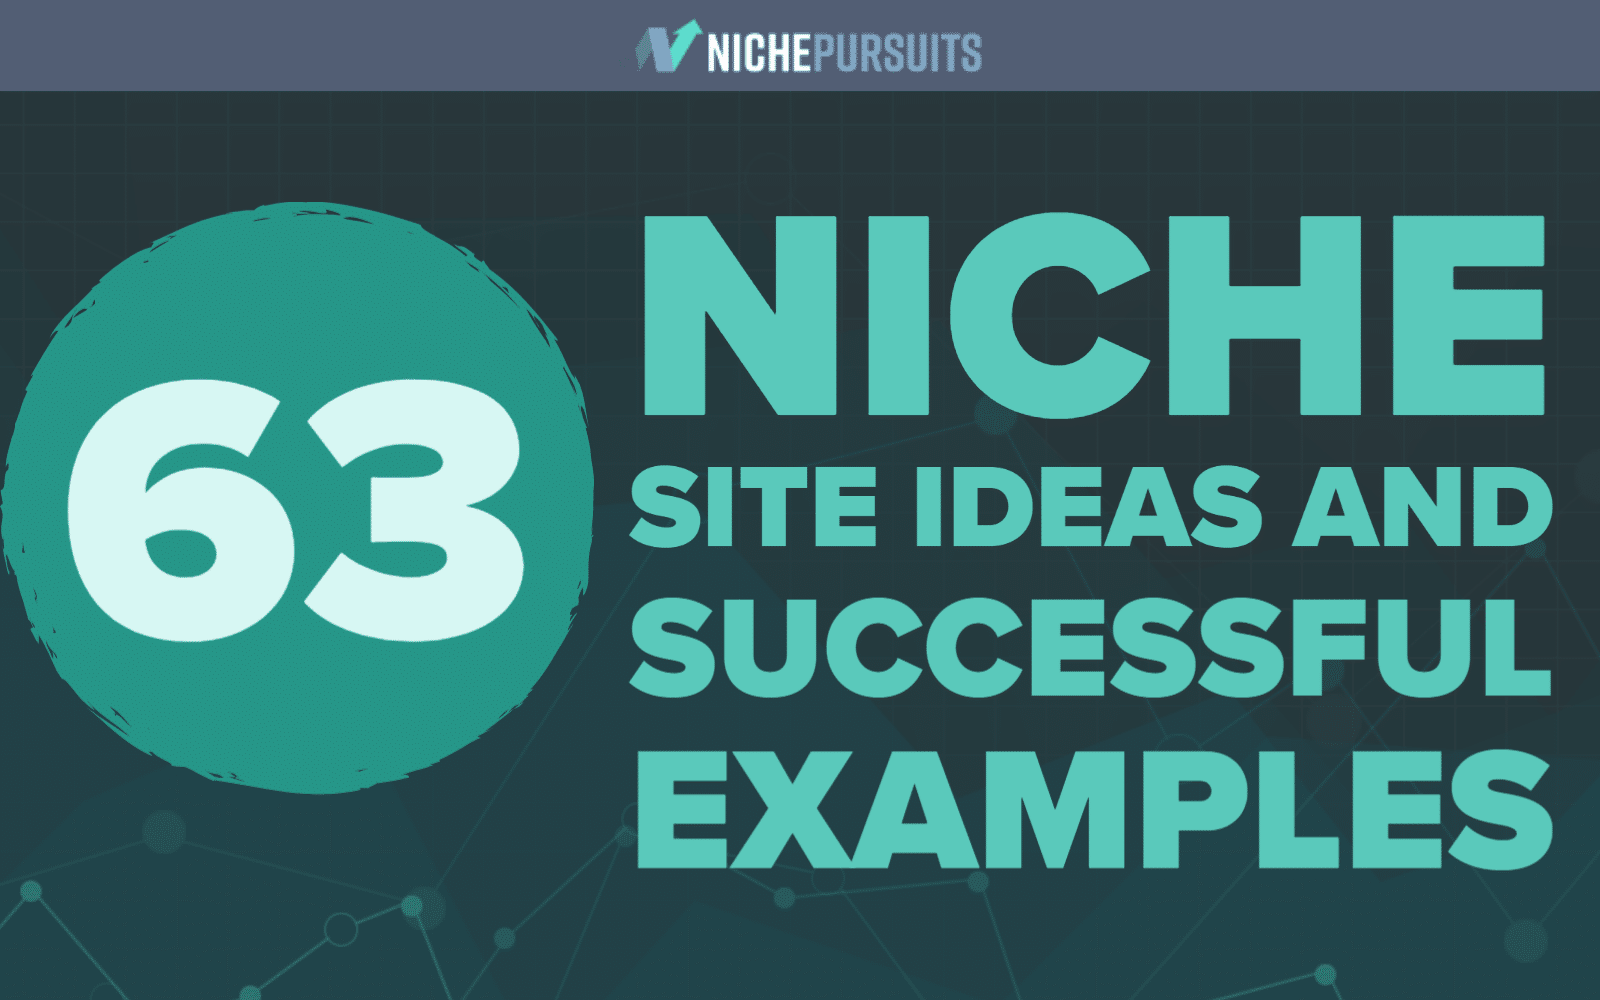 63 Niche Site Ideas & Successful Website Examples to Inspire You